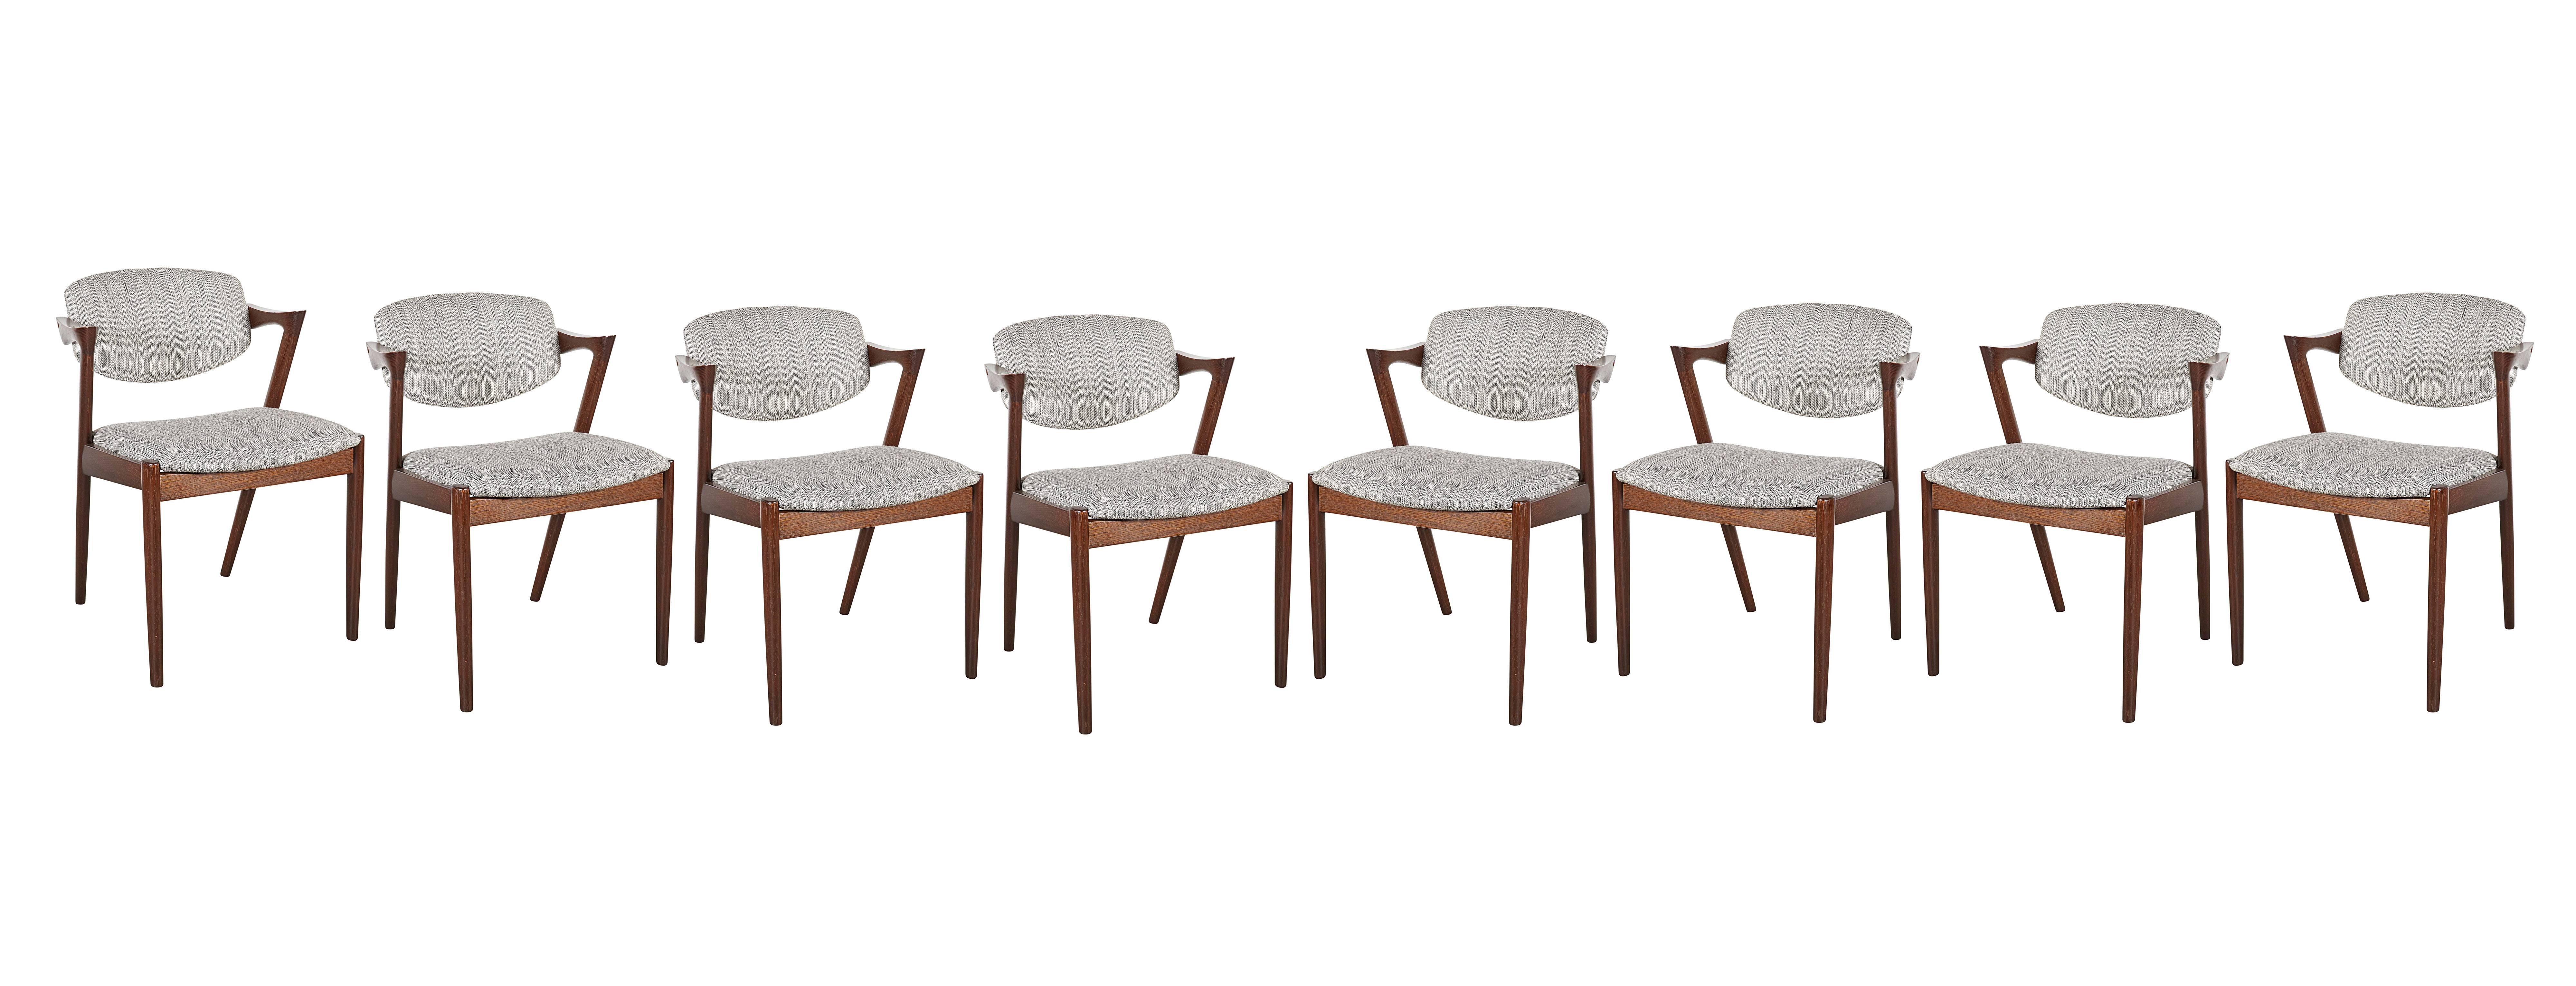 Mid Century 1950s Dining Chairs by Kai Kristiansen

These vintage teak dining chairs are in excellent condition and stained in wenge, a rare find. Beautiful shape, and still the most comfortable dining chair you will ever sit in. Newly upholstered